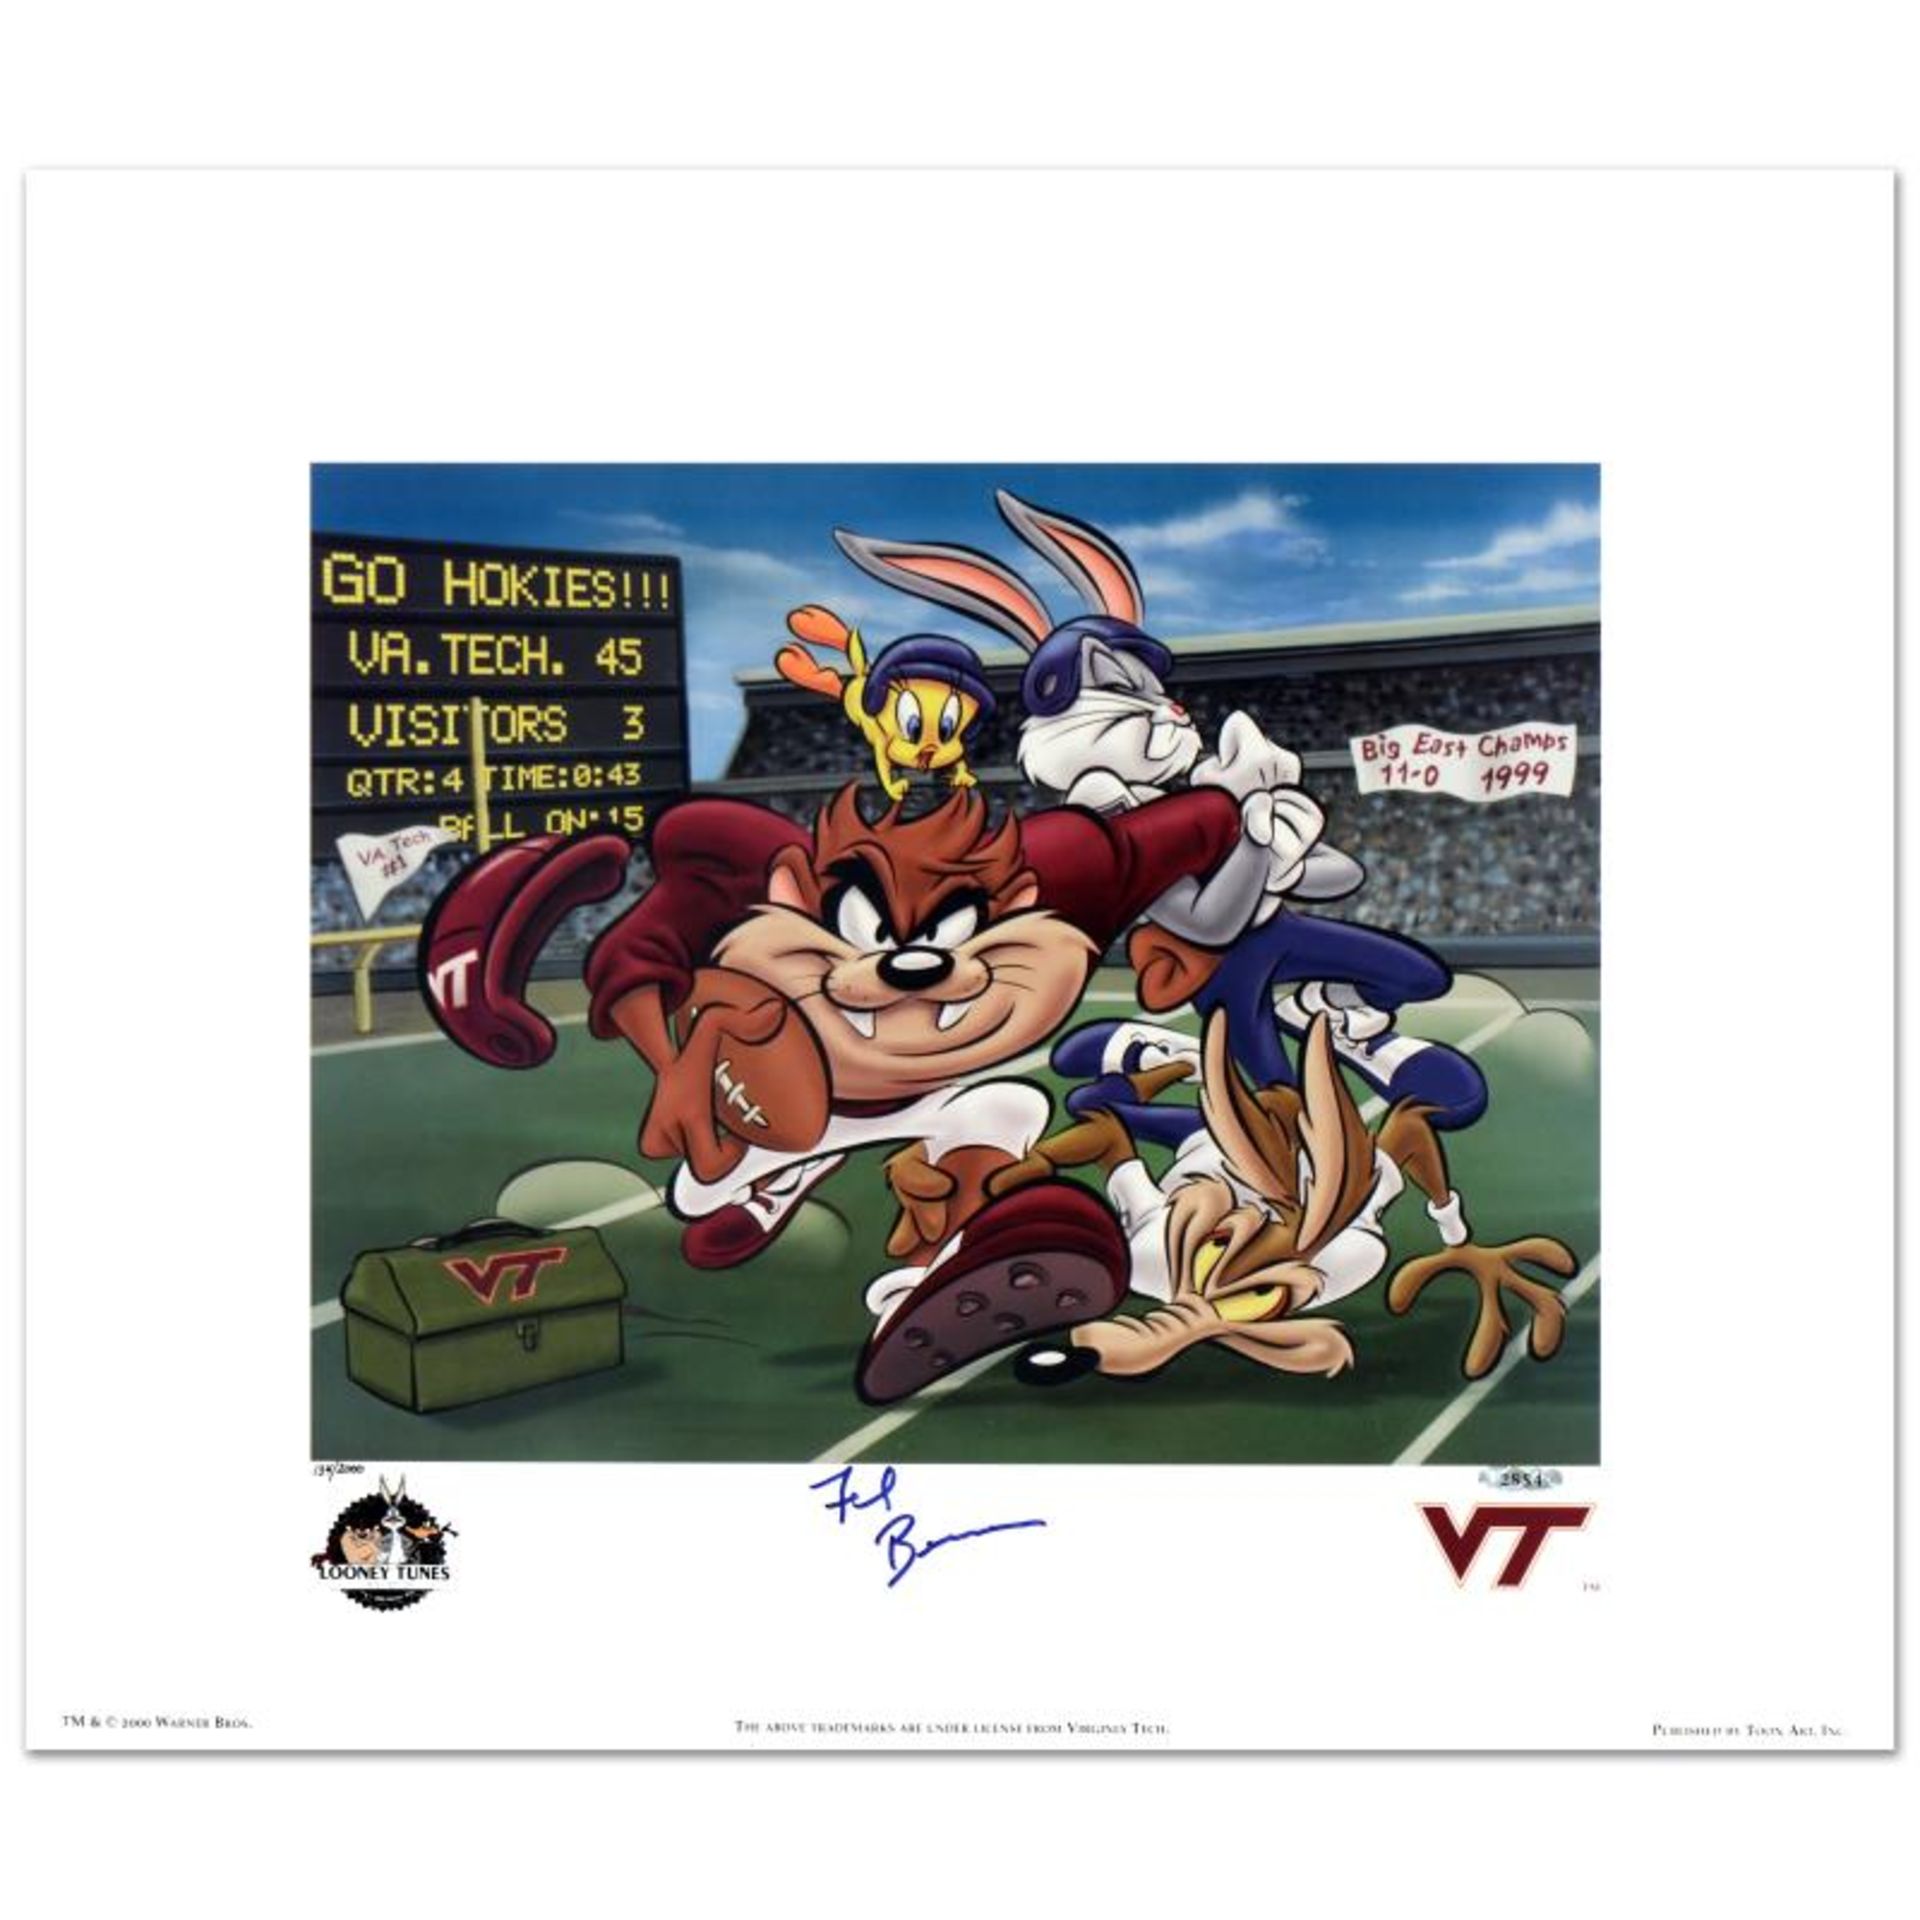 "Virginia Tech, Frank Beamer" Limited Edition Lithograph from Warner Bros., Numb